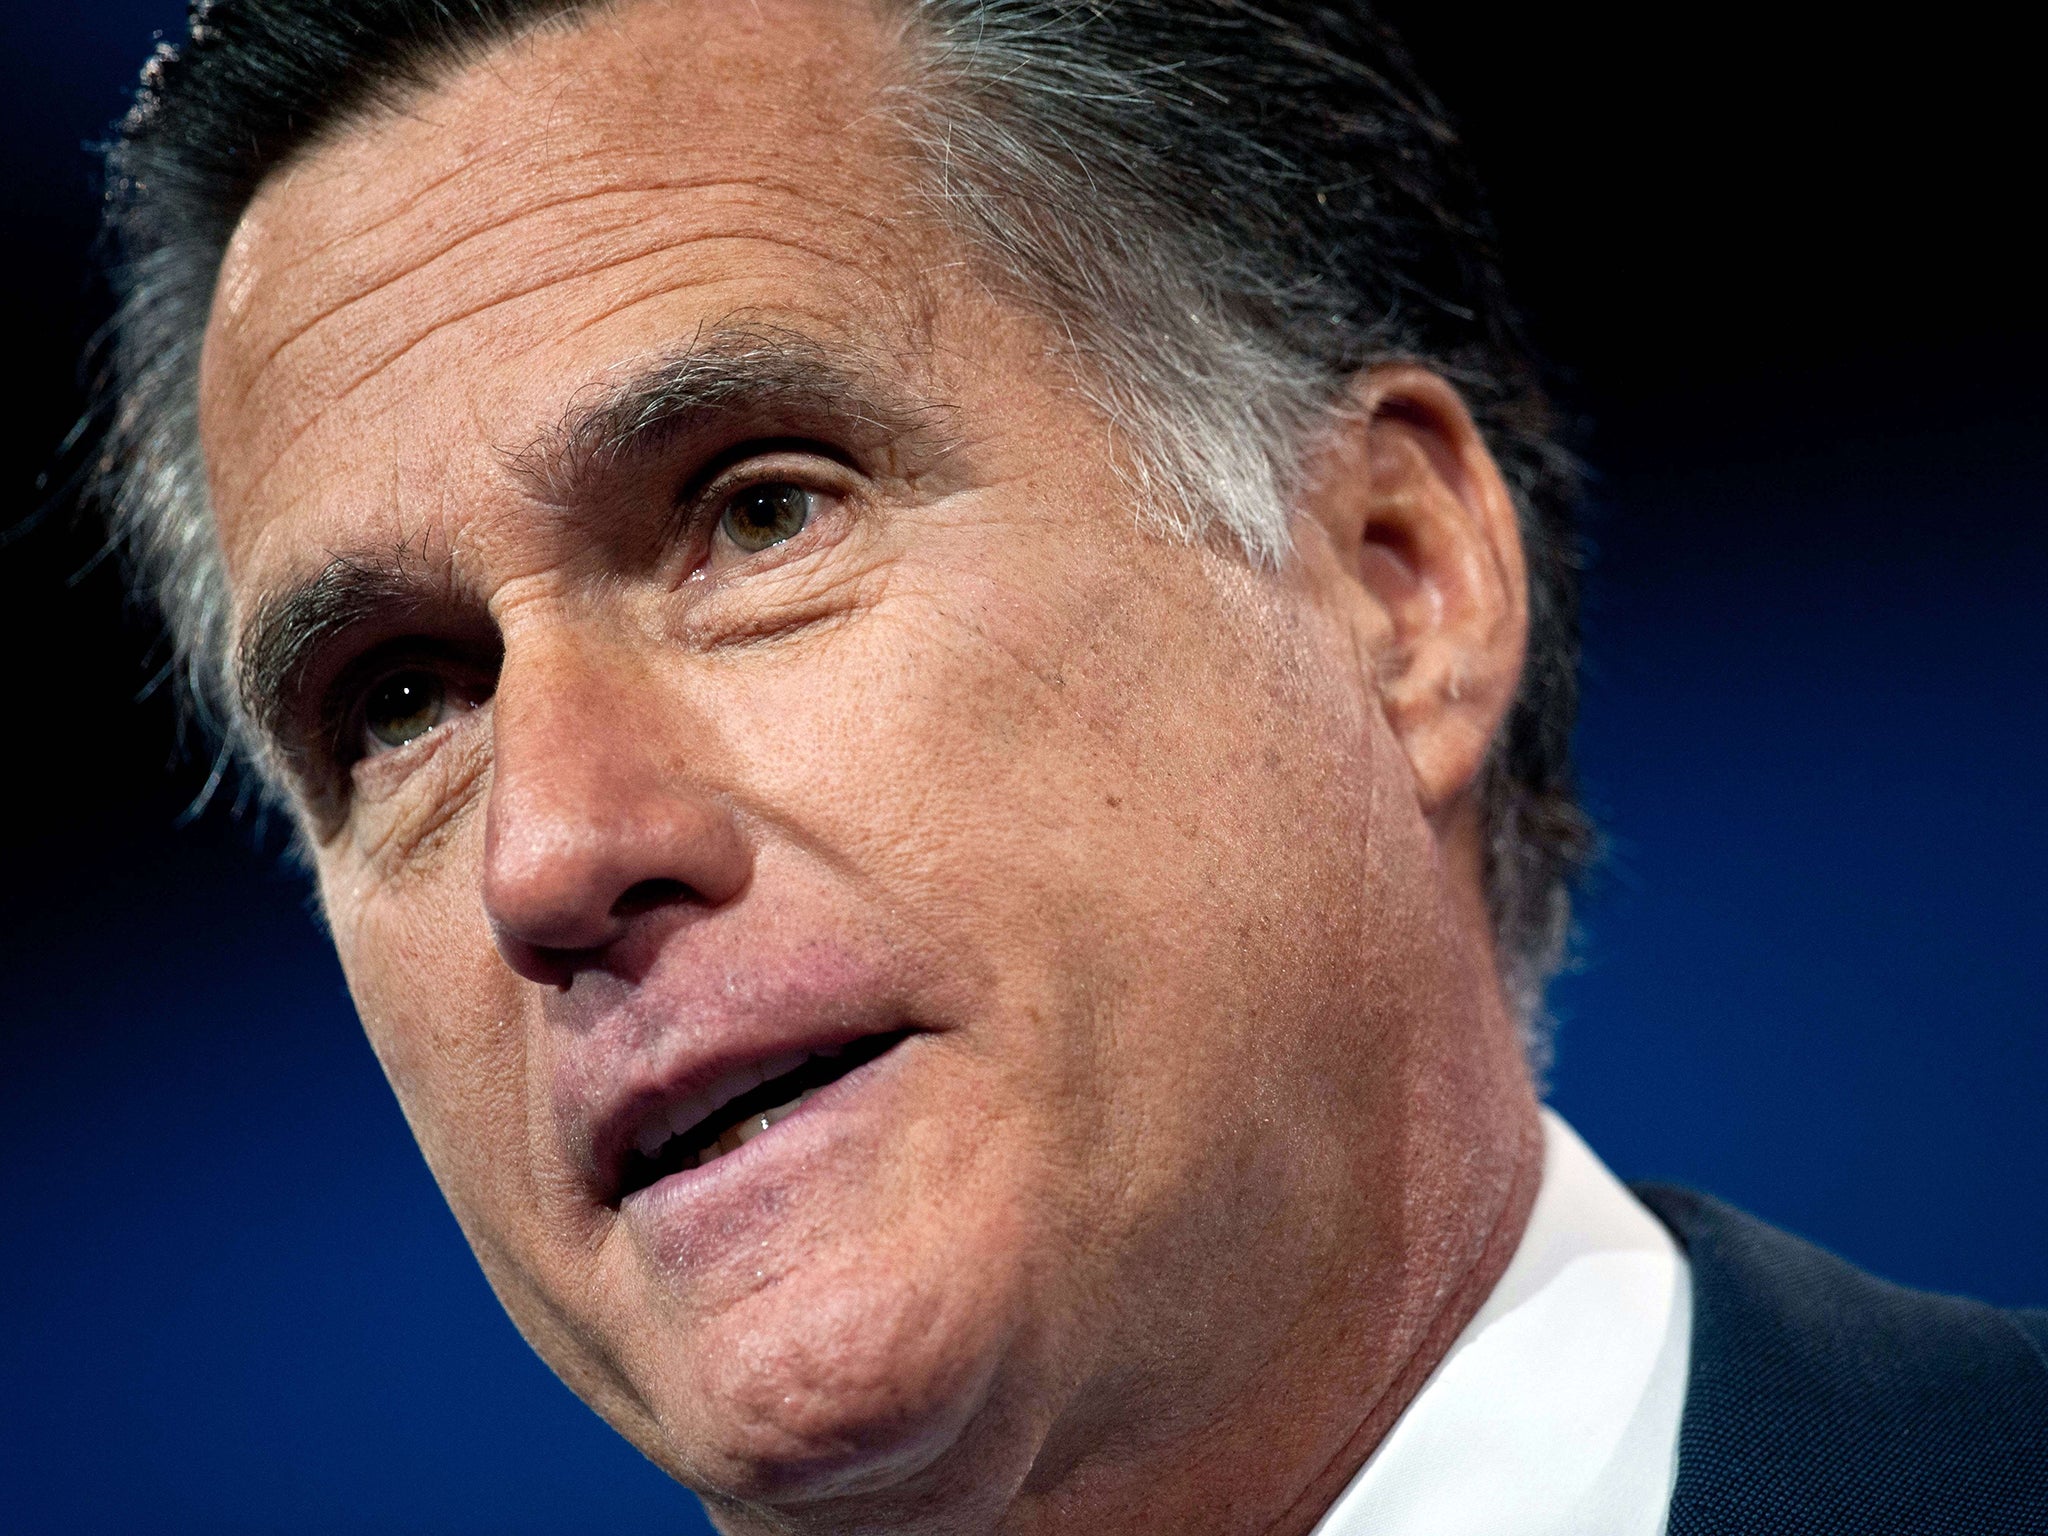 Republican candidate Mitt Romney told of his desire to stand again